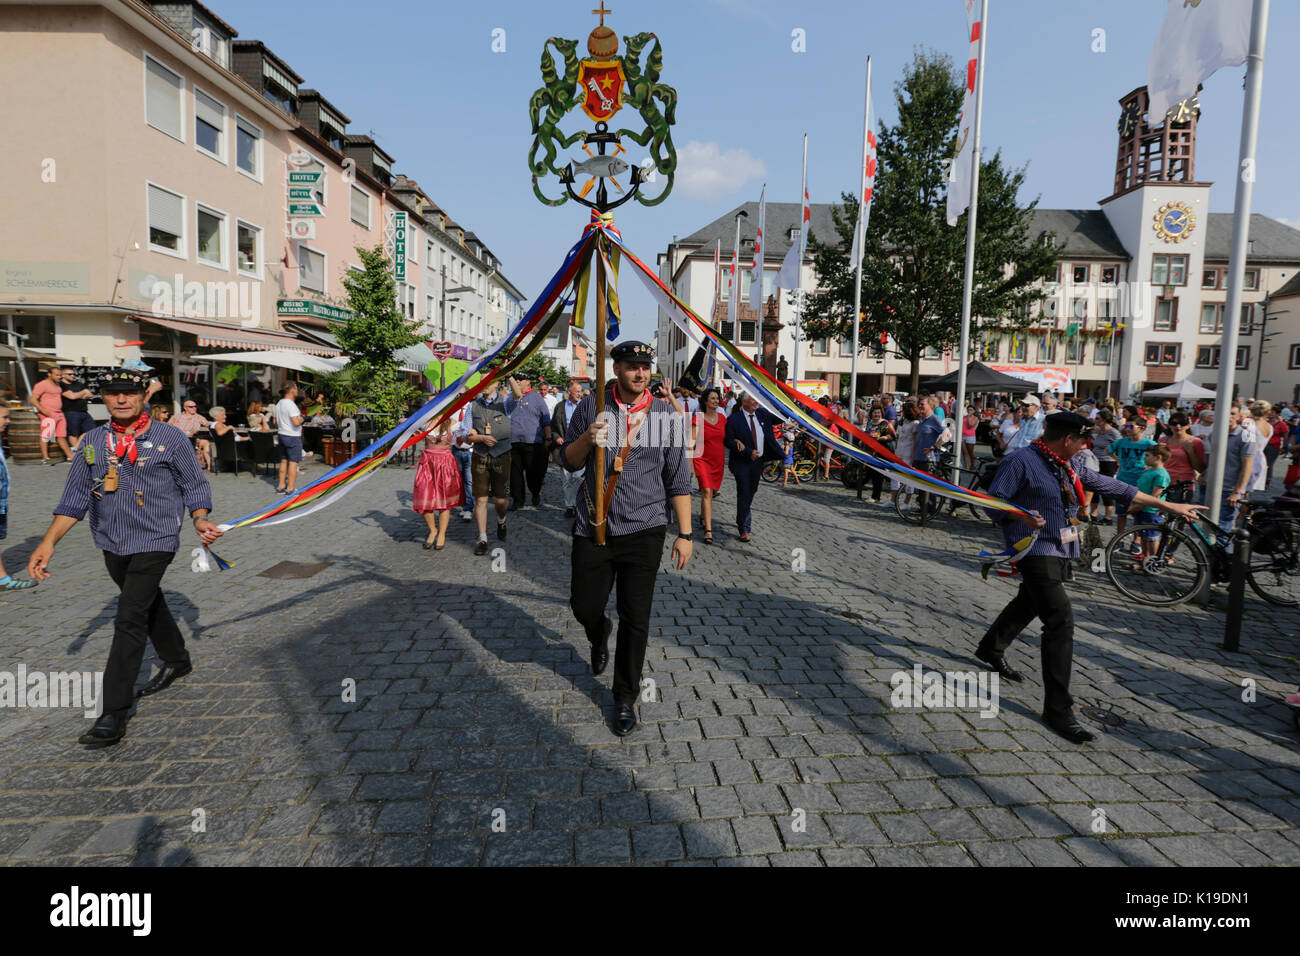 Worms, Germany. 26th August 2017. The representatives of the old fishermen's Guild of Worms march through the city centre of Worms. The largest wine and funfair along the Rhine, the Backfischfest started in Worms with the traditional handing over of power from the Lord Mayor to the mayor of the fishermen’s lea. The ceremony was framed by dances and music. Secretary of state Daniela Schmitt from the Rhineland-Palatinate ministry for economy, transport, agriculture and viticulture attended the opening Credit: Michael Debets/Alamy Live News Stock Photo